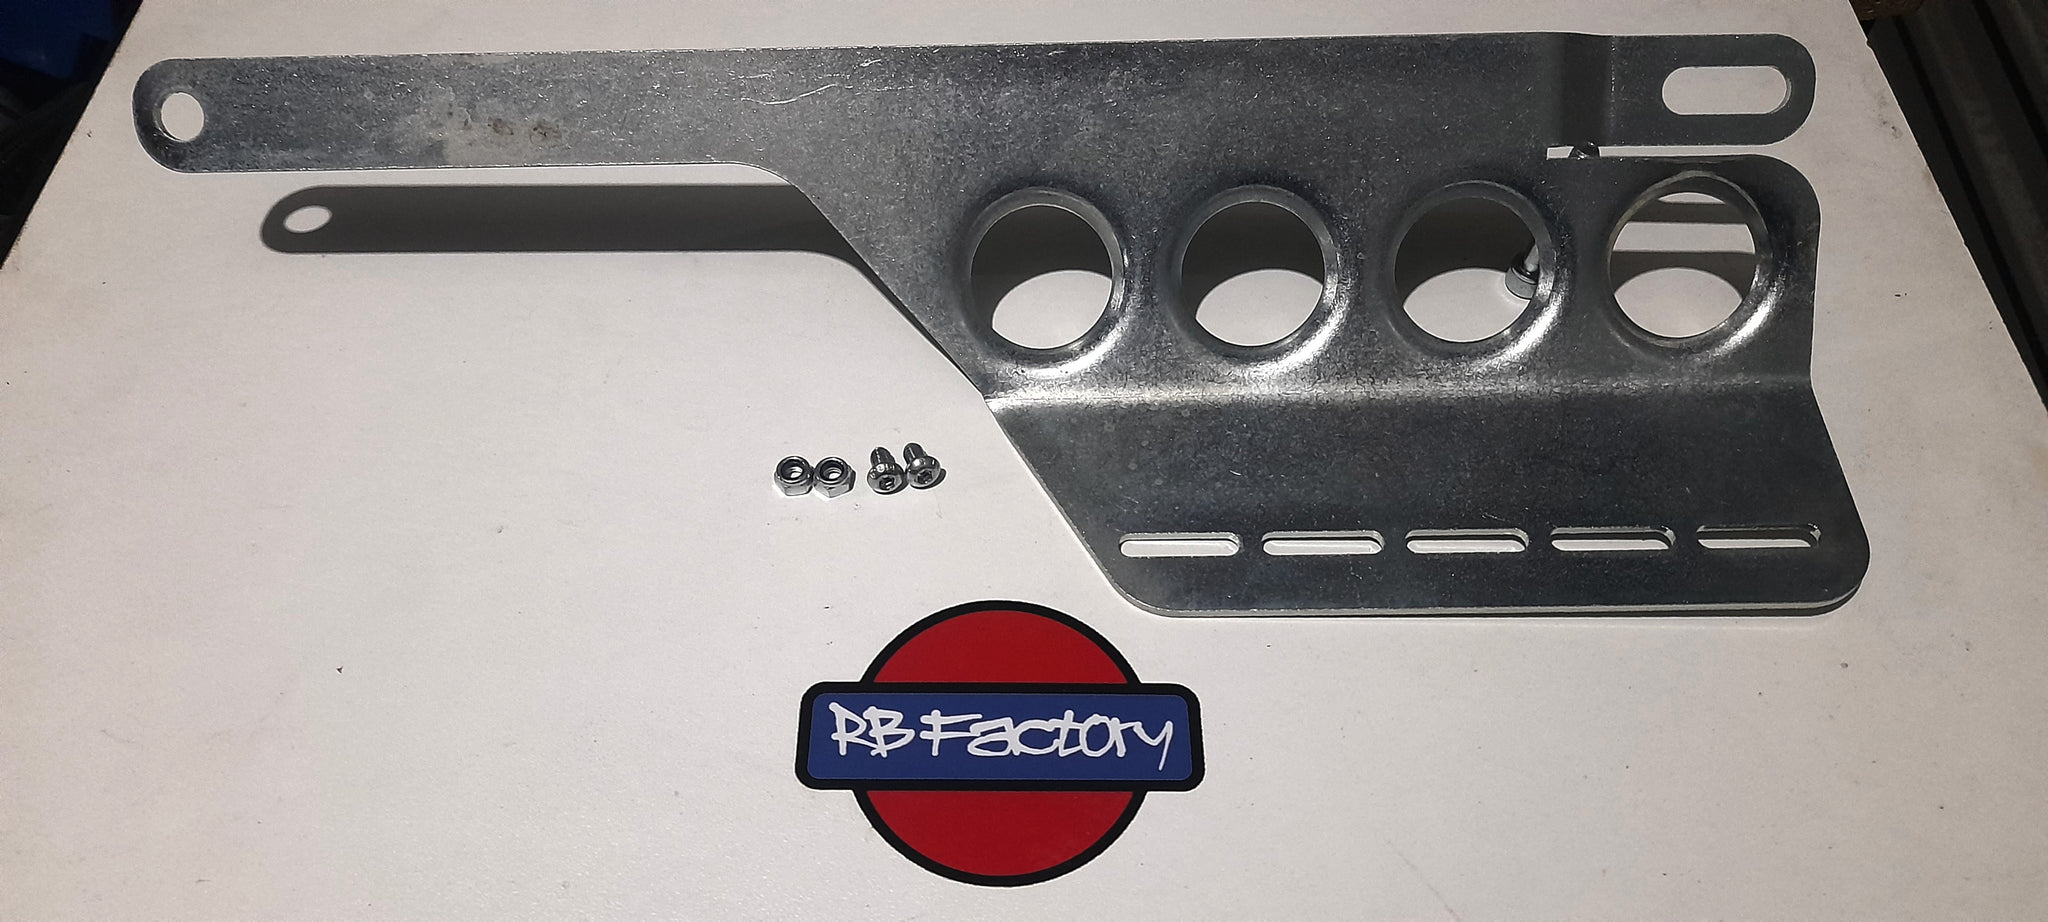 R32 R33 dimple die fire extinguisher mount - Passengers side